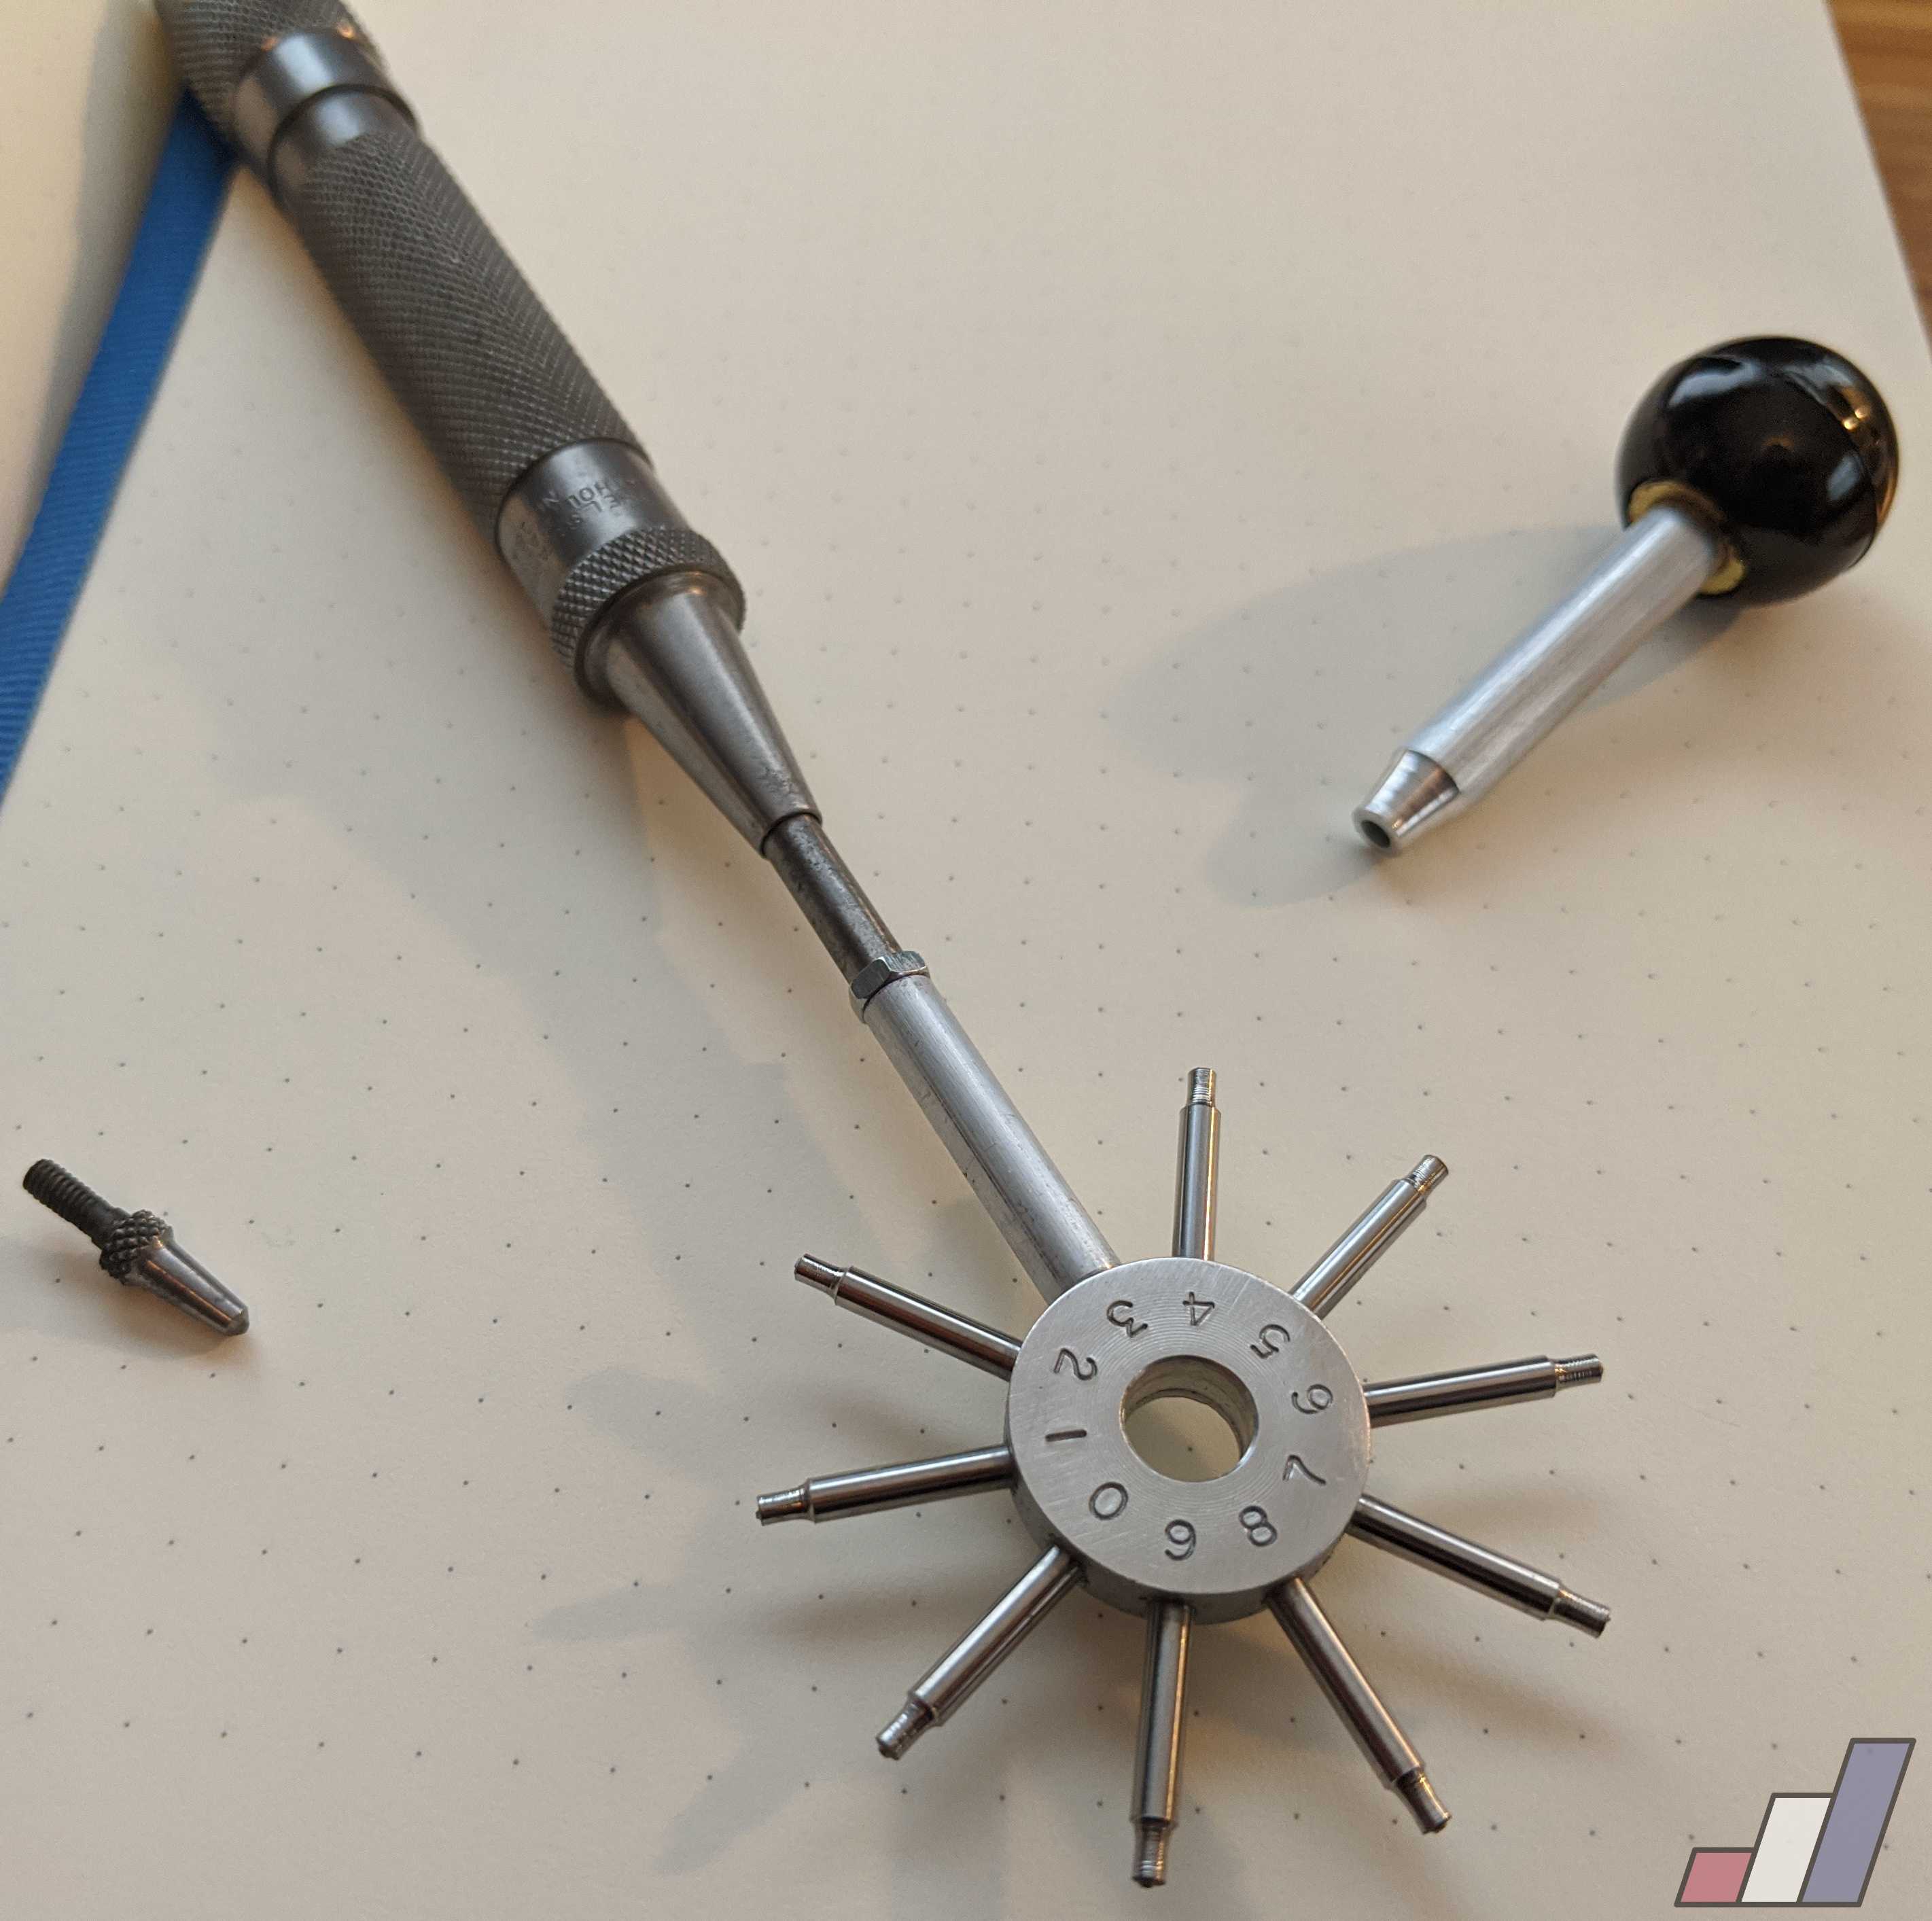 Microstamping tool with a shop-built adapter for an automatic punch.